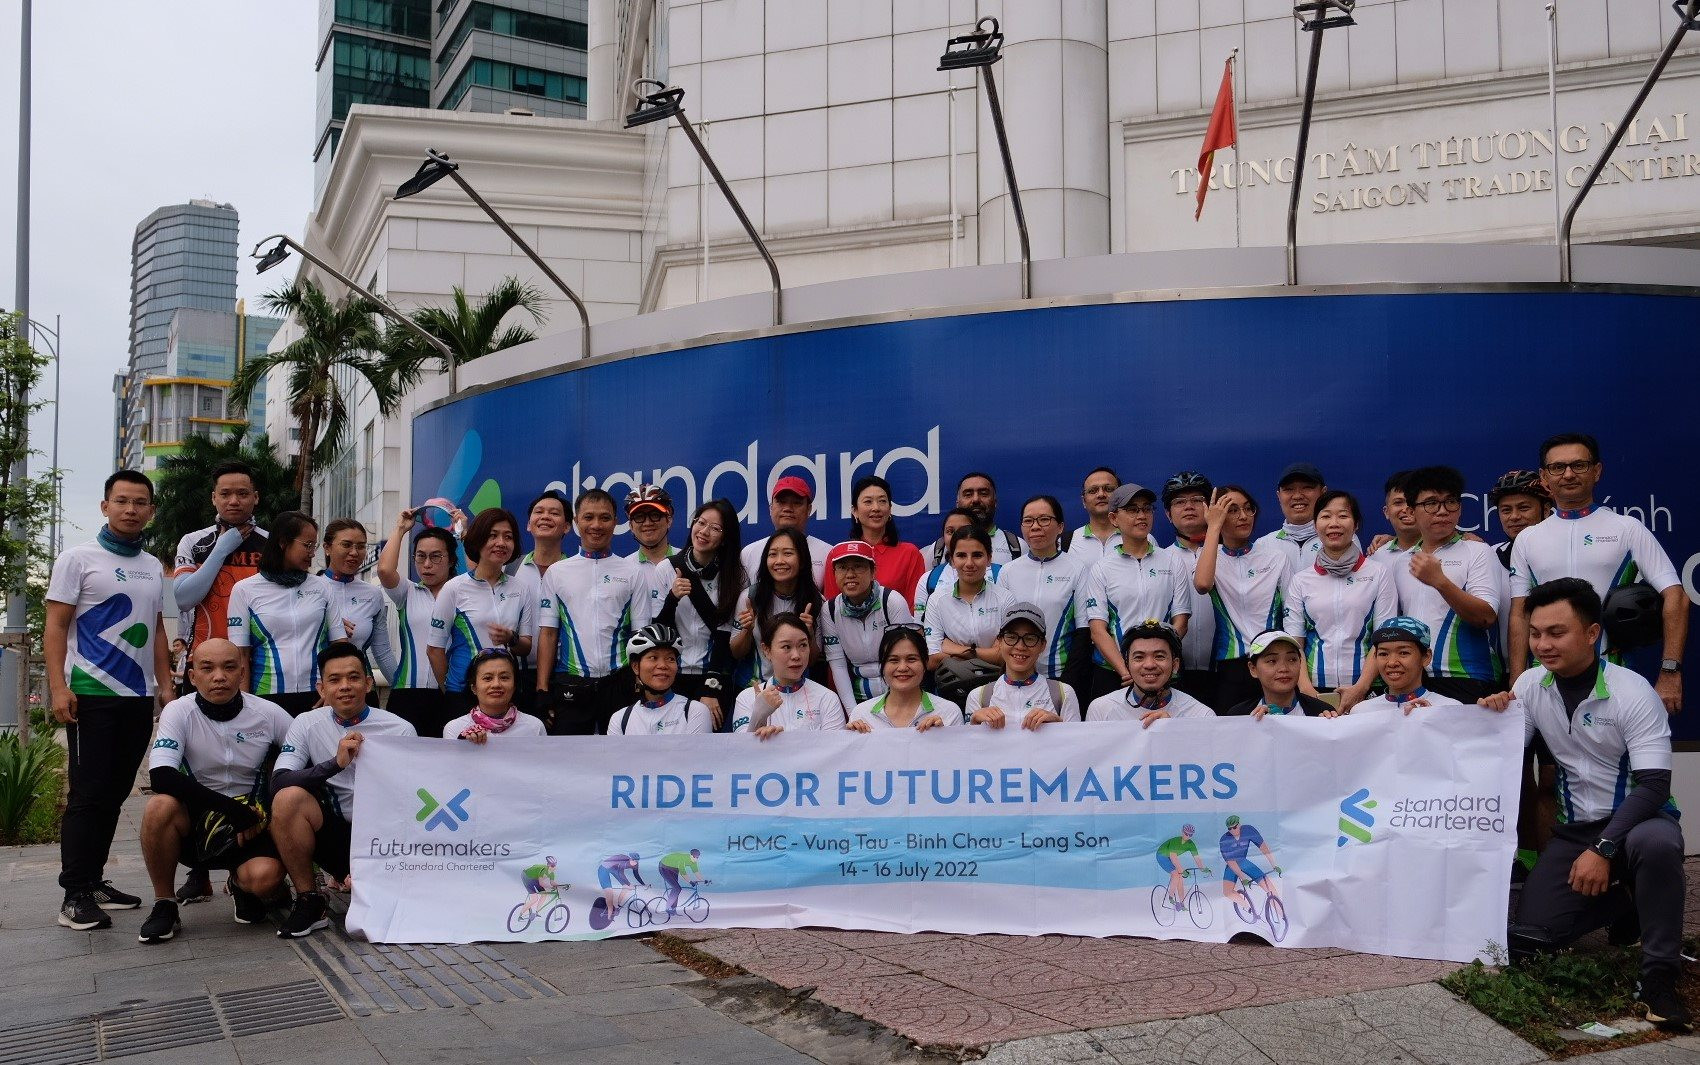 ride-for-futuremakers-2022-in-vietnam-by-standard-chartered.jpg